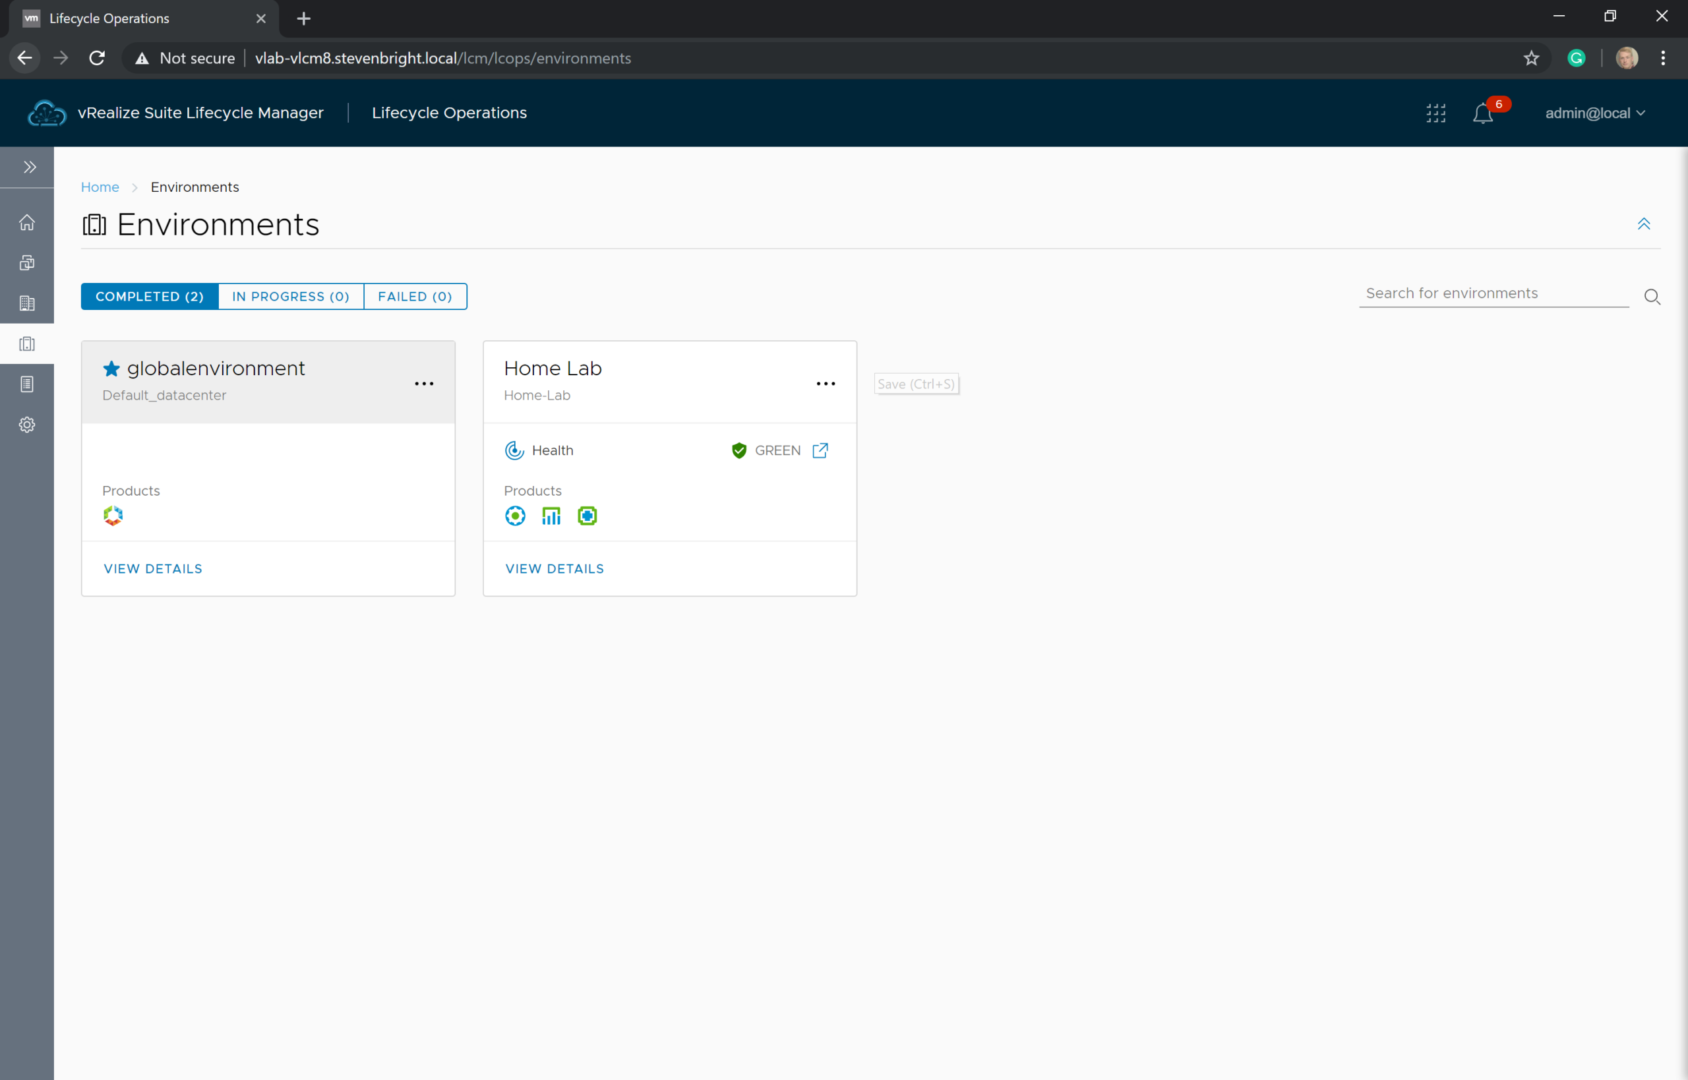 vRealize Suite Lifecycle Manager - Environments